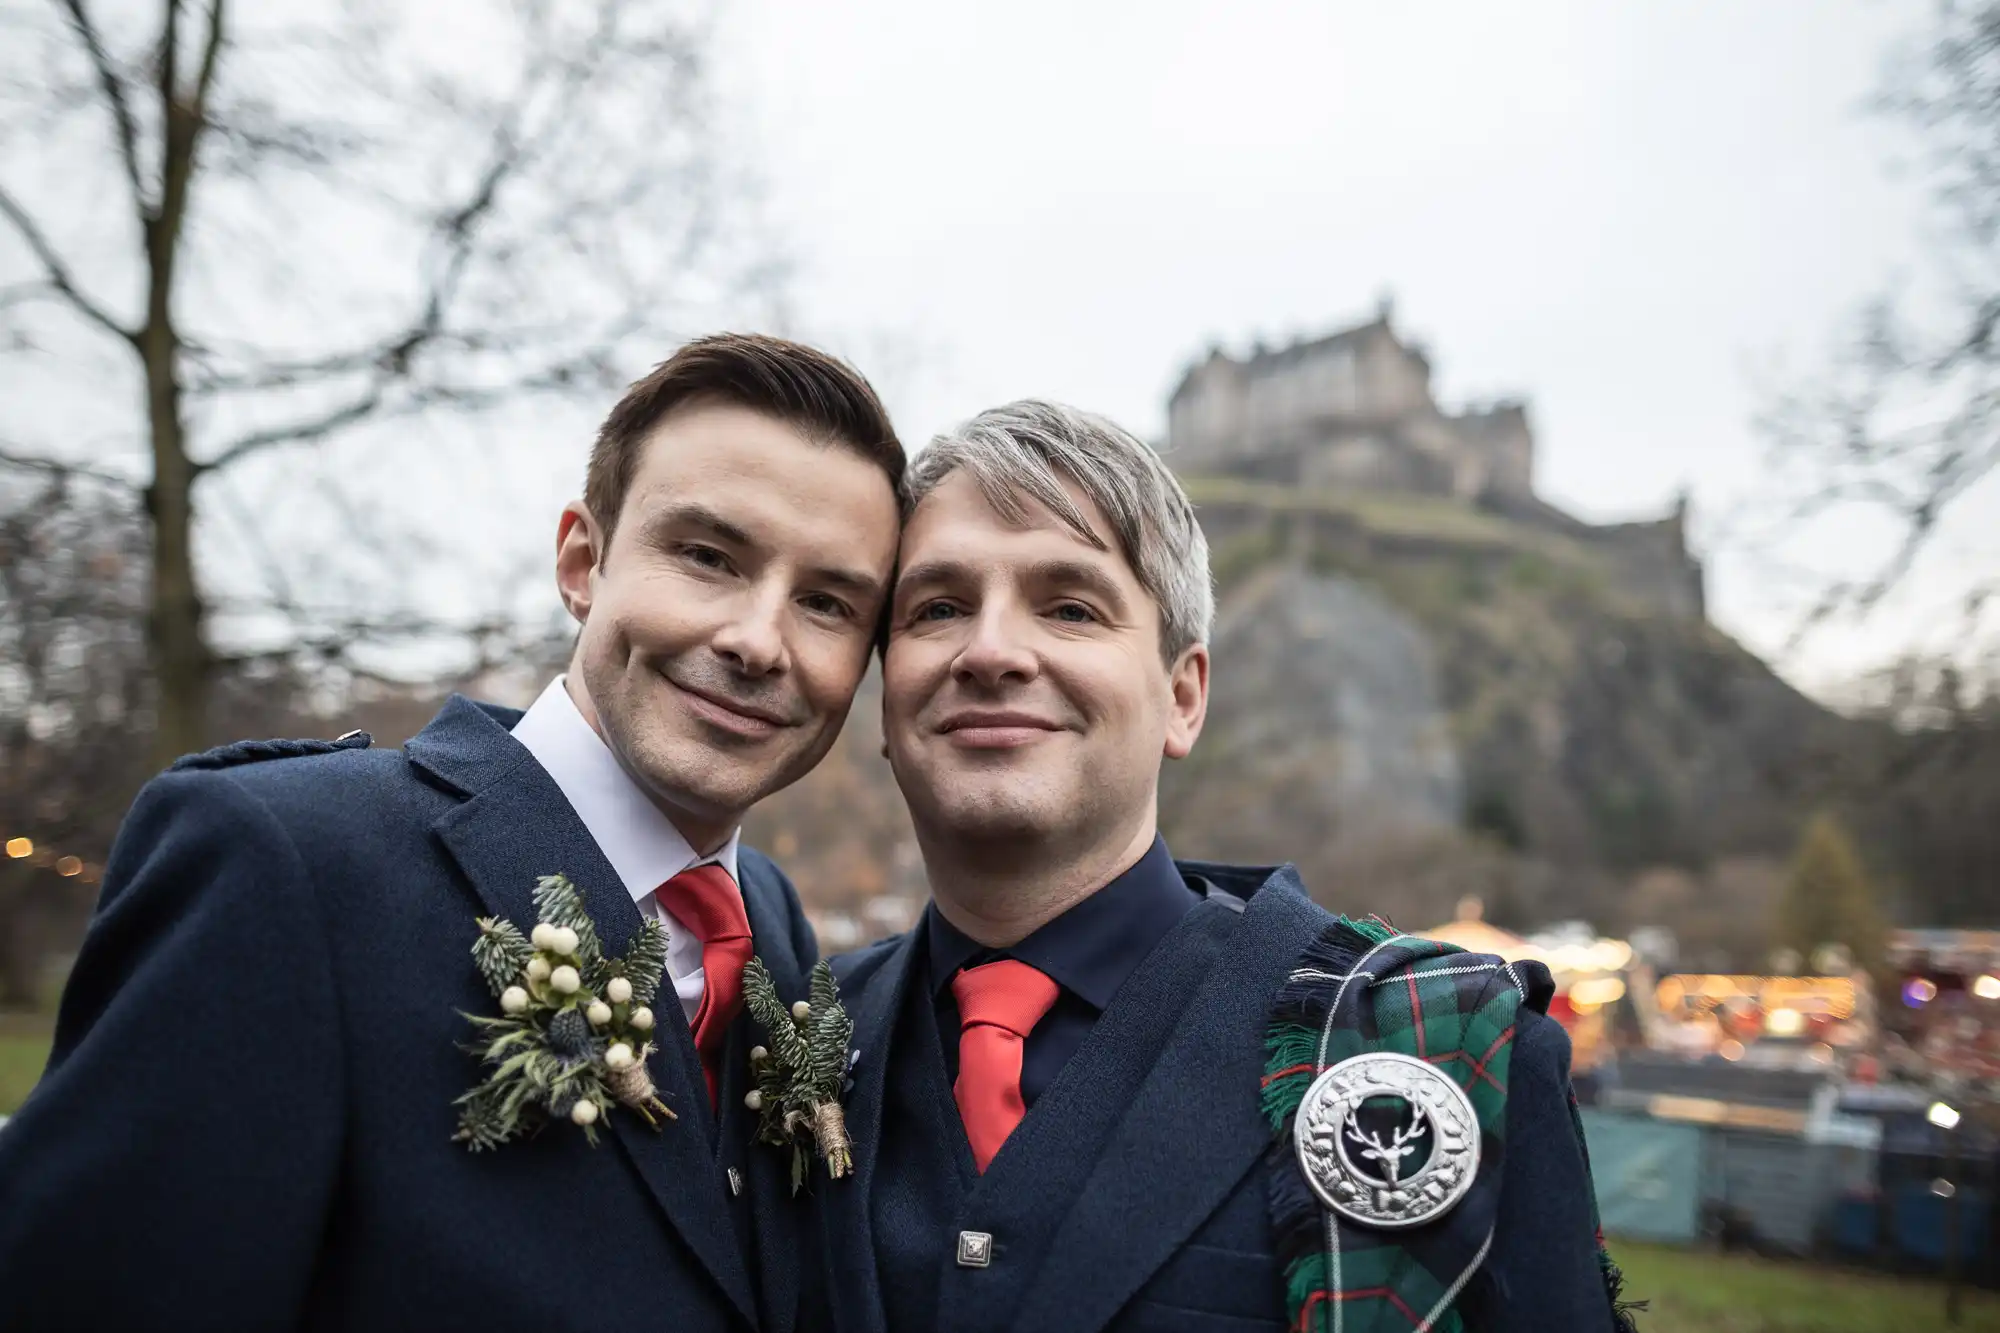 Two men in formal attire and red ties stand closely together, smiling, at an outdoor location with a large castle in the background.